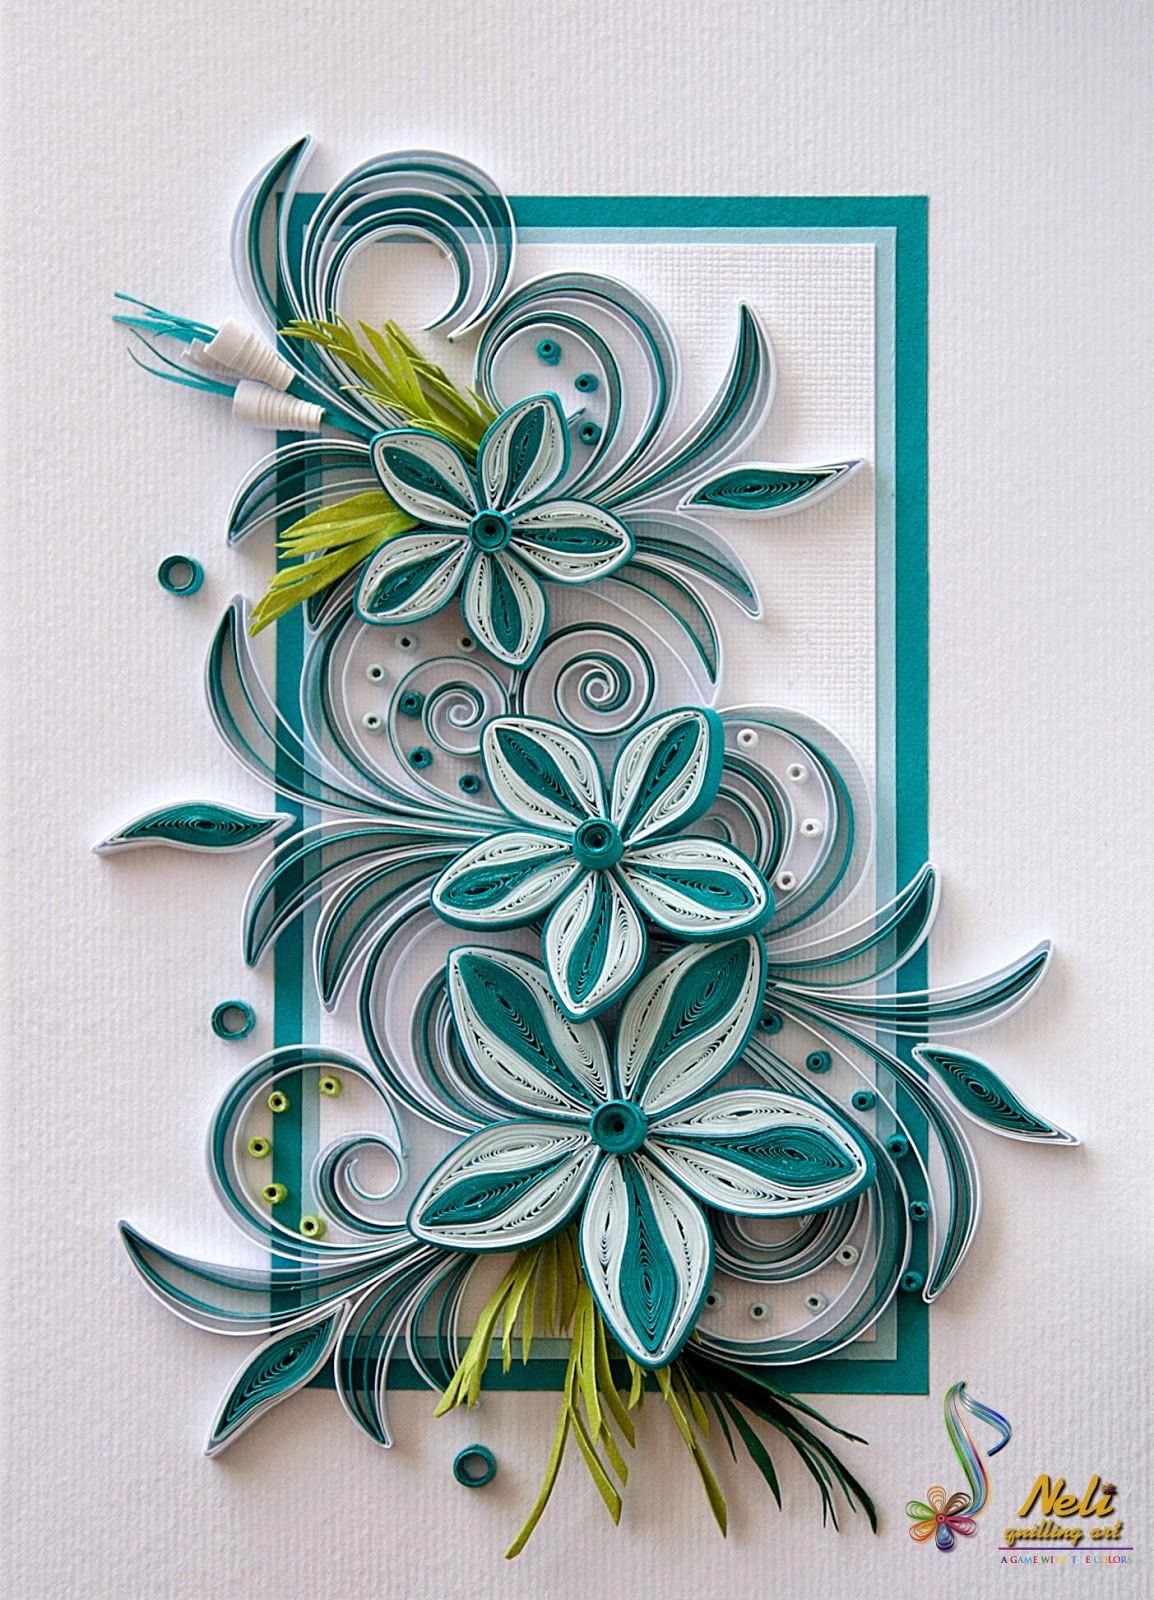 Paper Quilling Patterns Free Fresh Neli Quilling Card 14 8 Cm 10 5 Cm